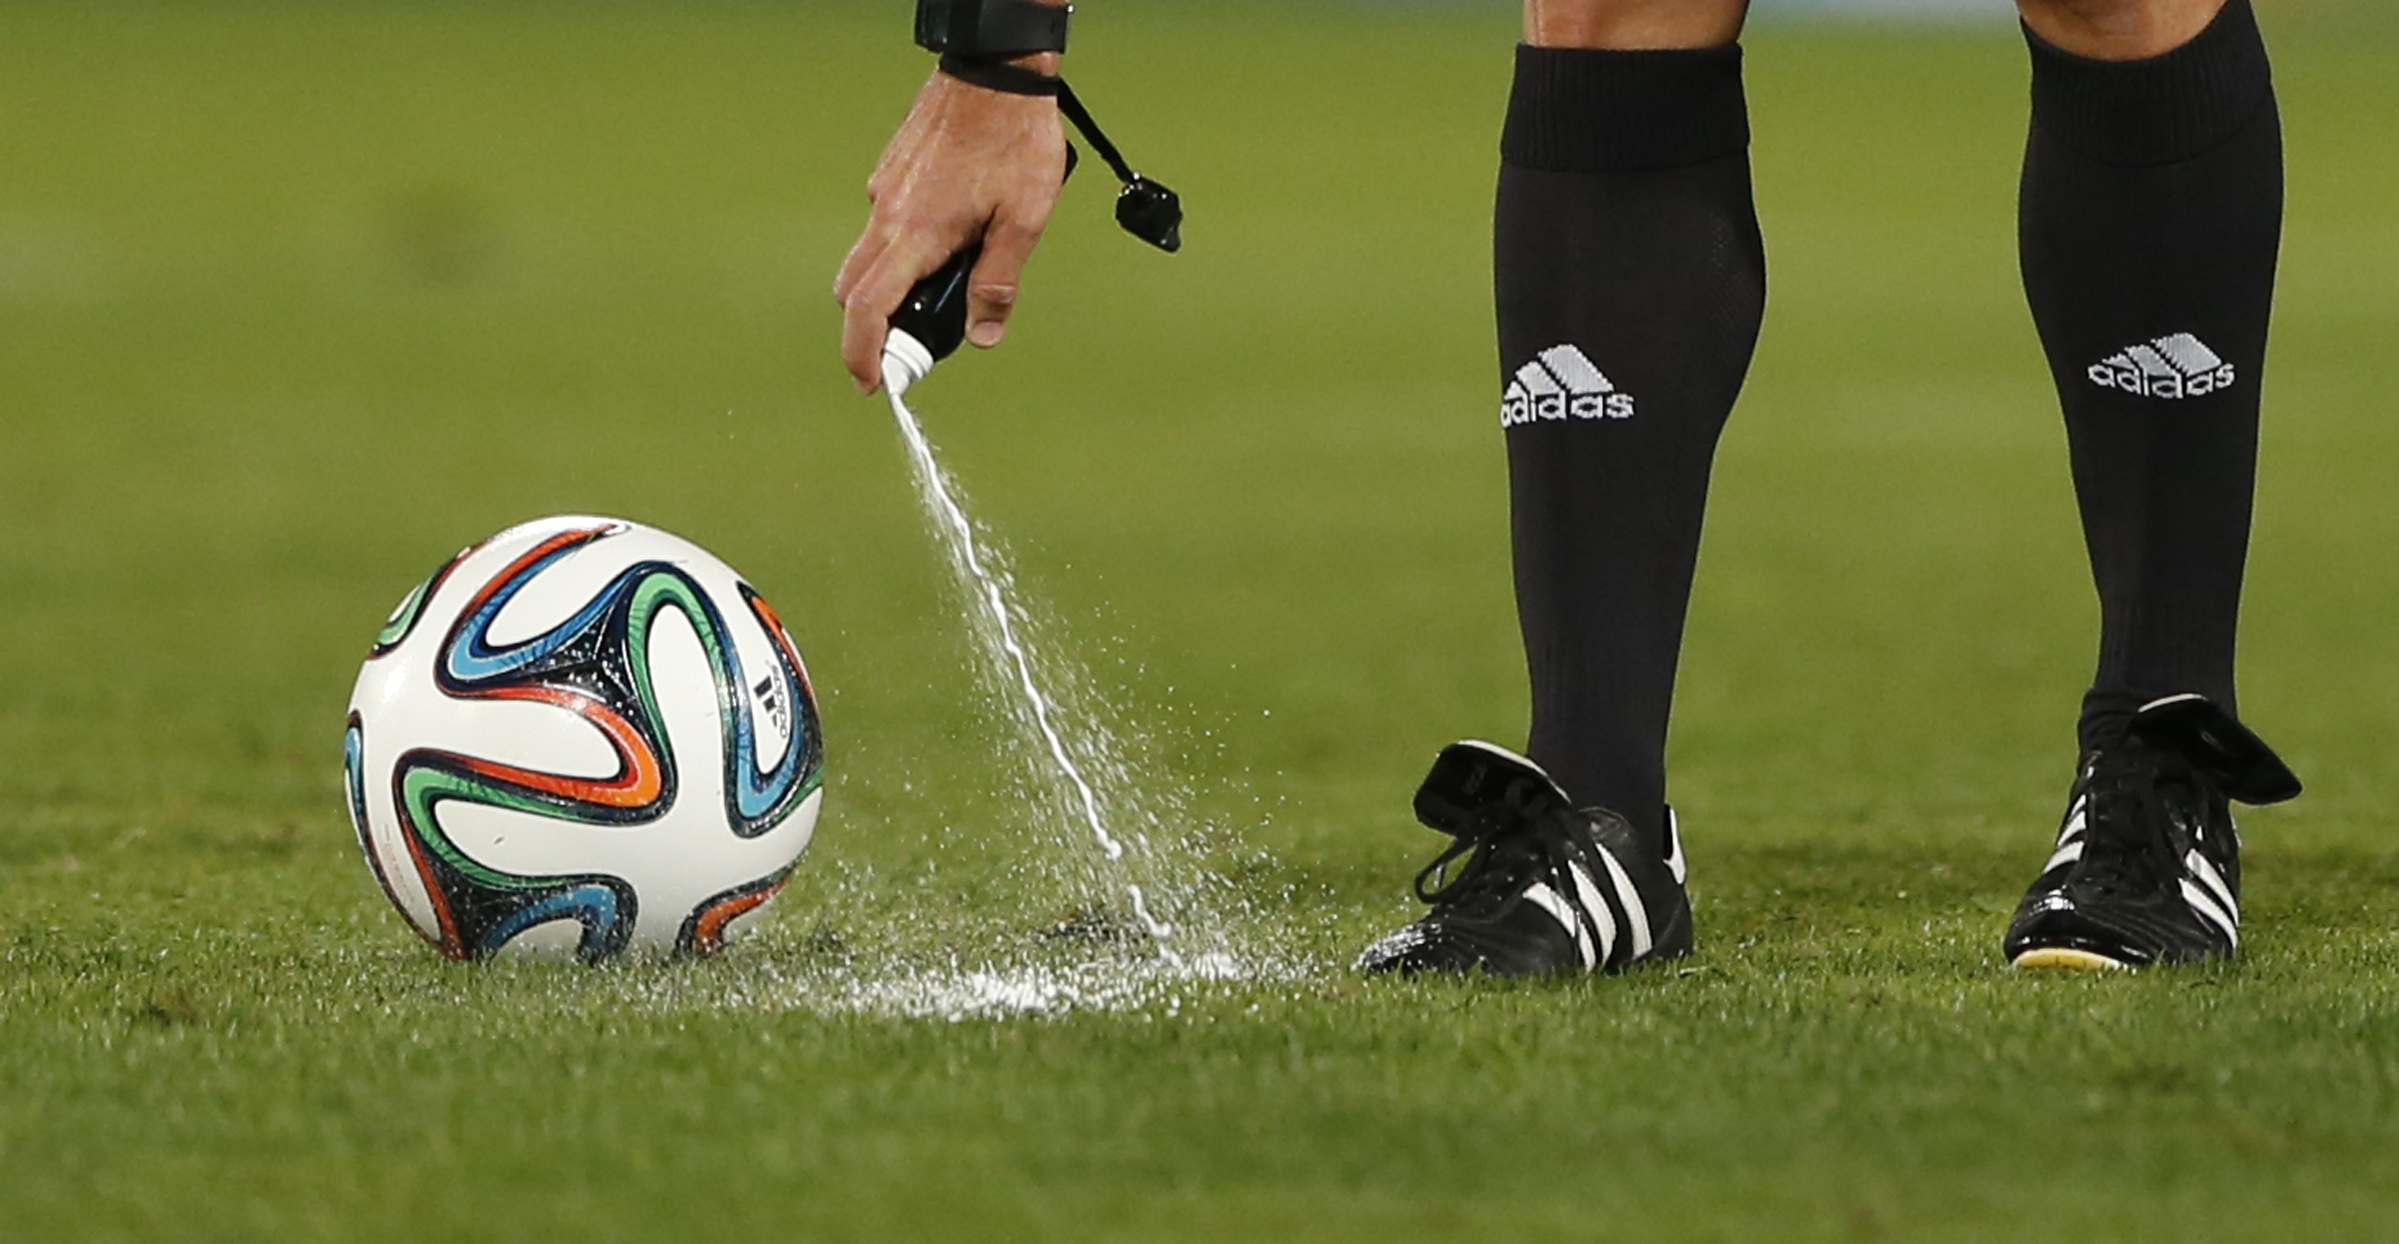 Referee Carlos Velasco of Spain marks a line with a spray during their semi final soccer match between Raja Casablanca and Atletico Mineiro at the Club World Cup soccer tournament in Marrakech, Morocco, Wednesday, Dec. 18, 2013. FIFA referees use vanishing spray to mark out the distance for a defensive wall from a free kick. The spray is popular in South America but is not widely used elsewhere. Vanishing spray is unlikely to be used at the World Cup in Brazil. (AP Photo/Matthias Schrader)